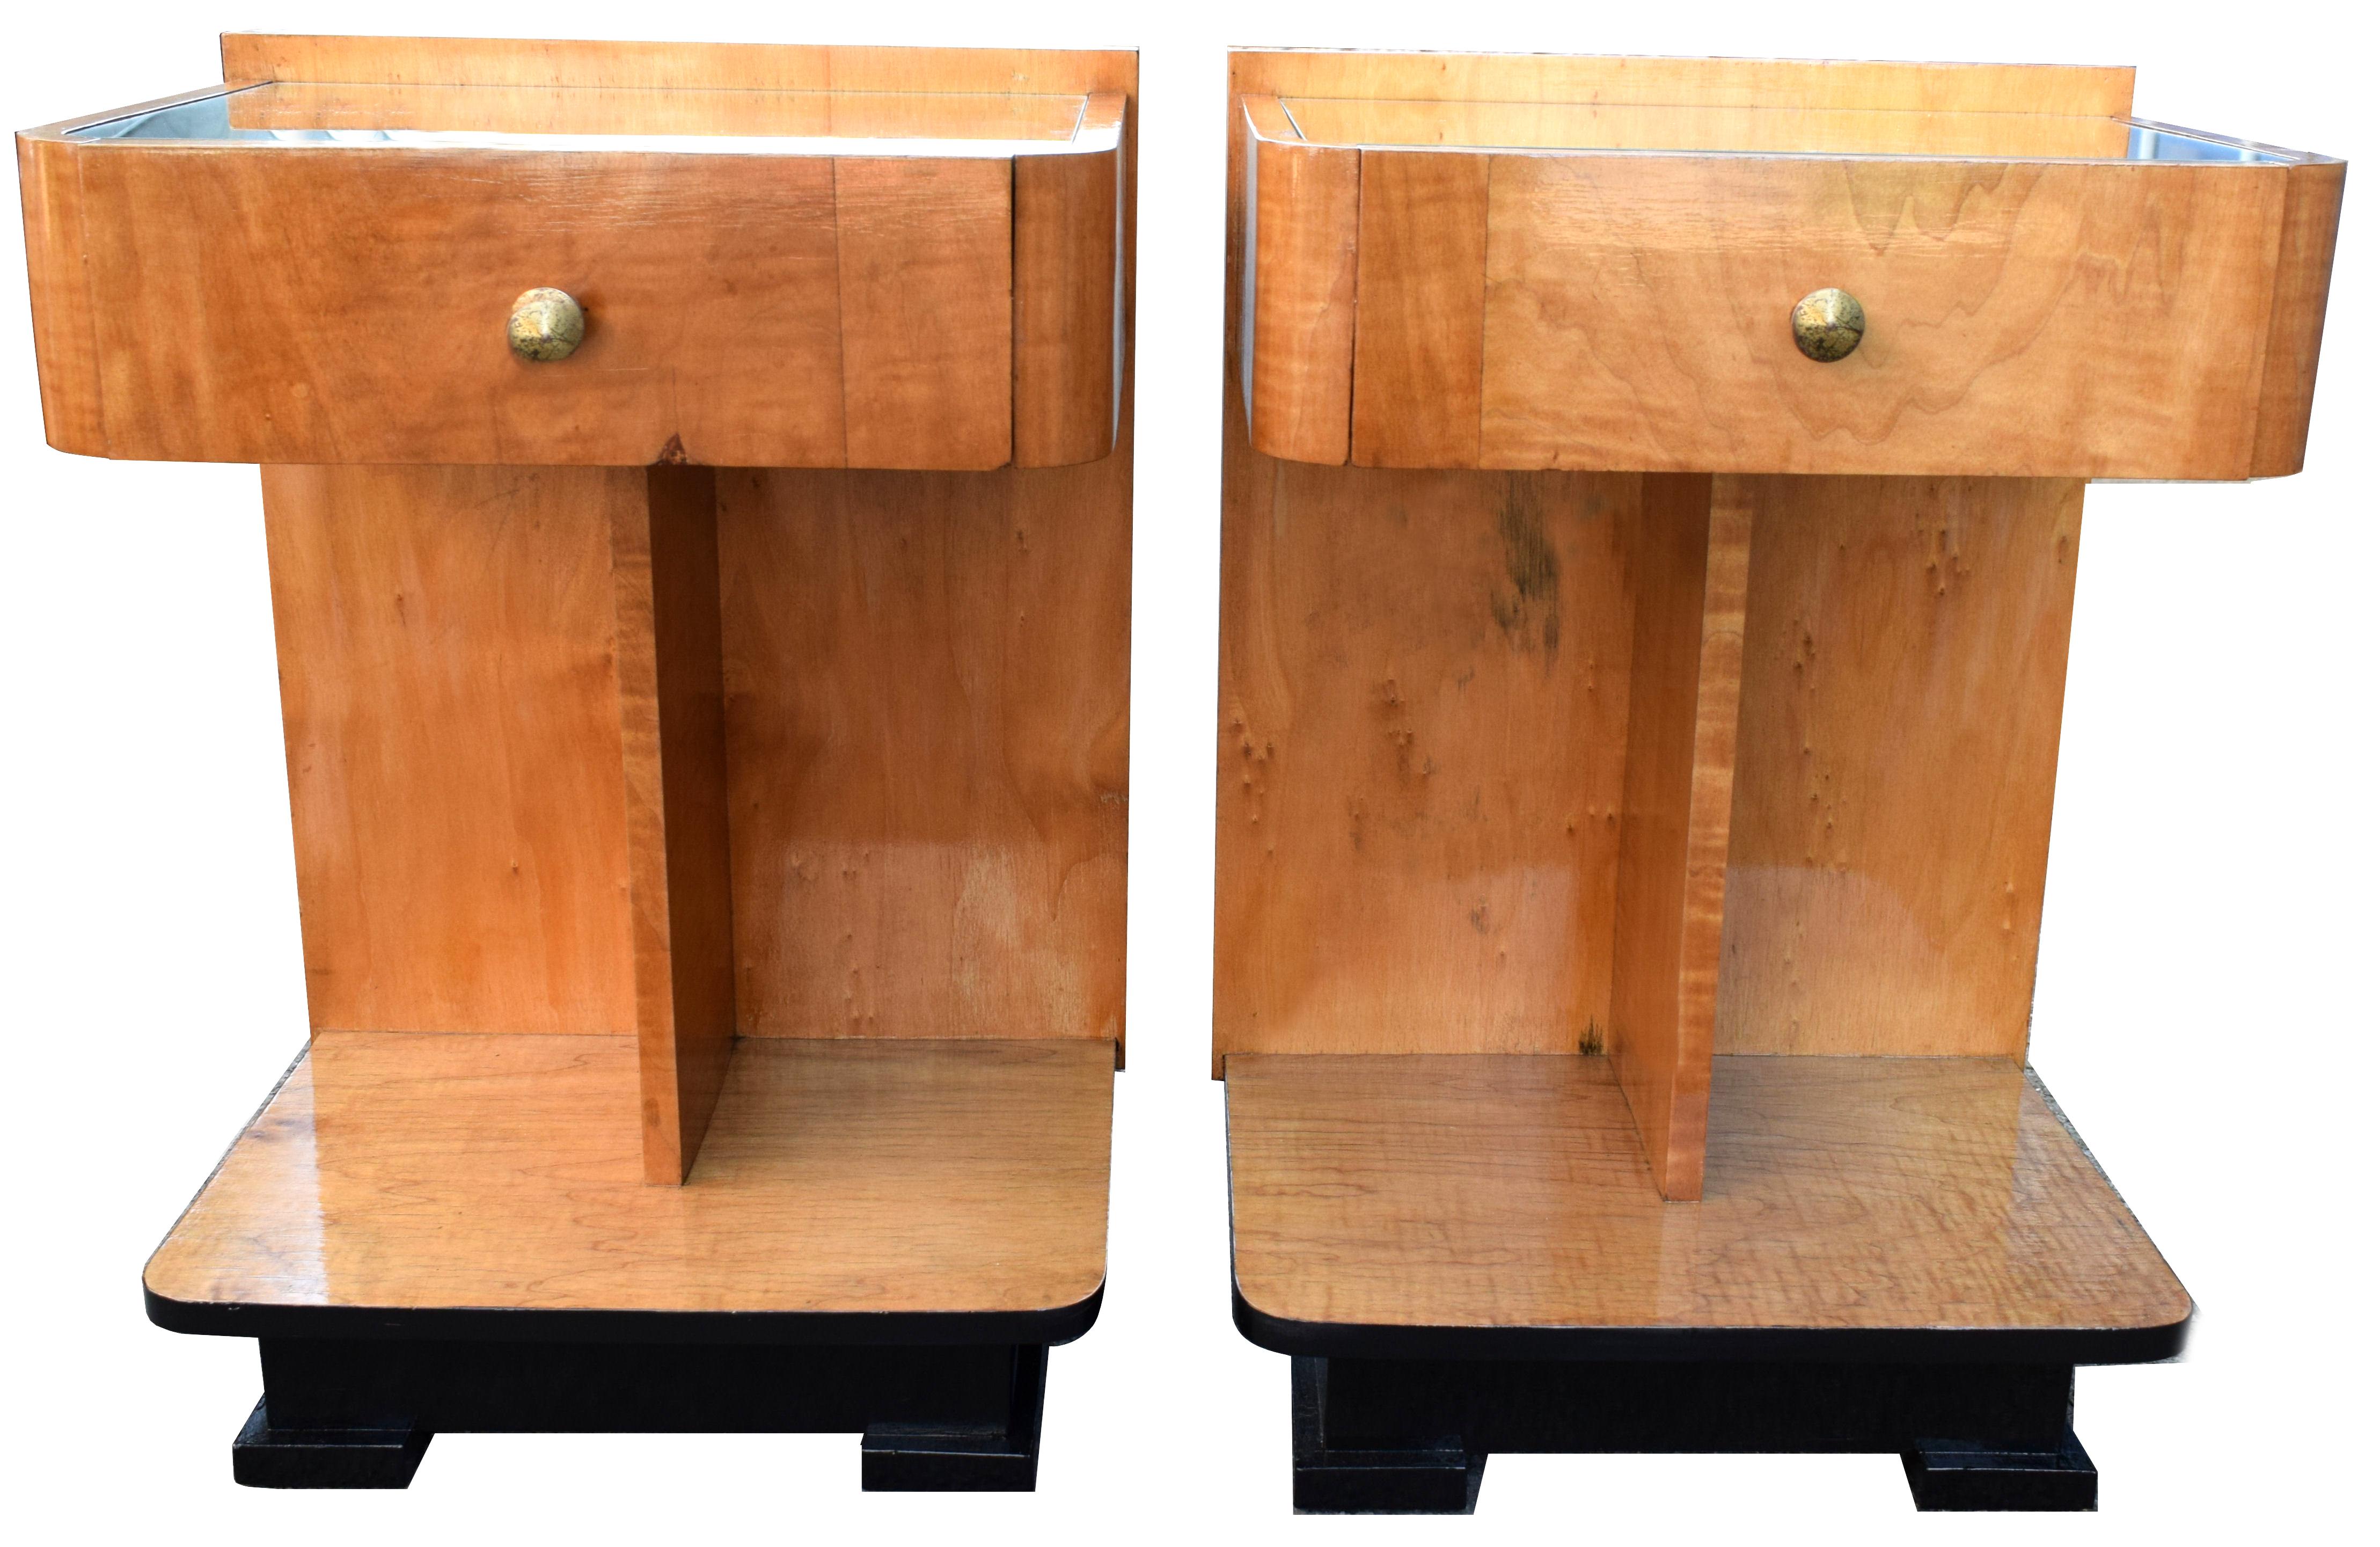 20th Century Modernist Art Deco Bedside Nightstand Cabinets, circa 1930s